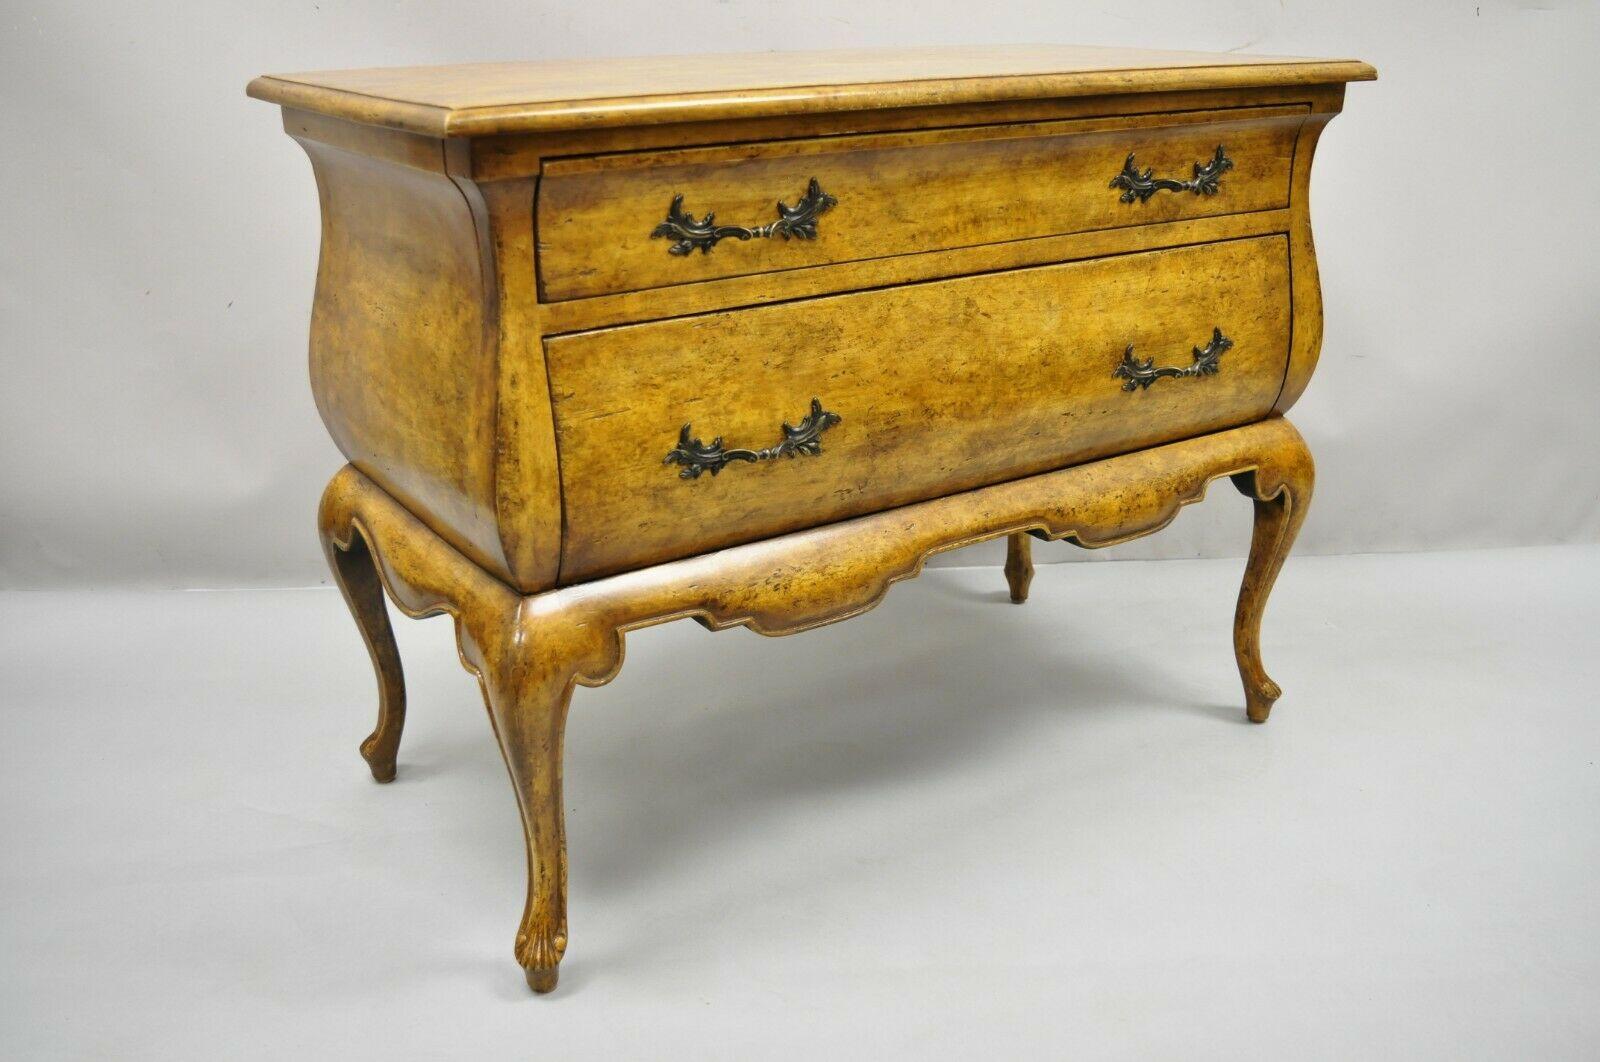 Minton Spidell French Provincial 2 Drawer Dutch Bombay Commode Chest. Item features solid wood construction, beautiful wood grain, distressed finish, nicely carved details, 2 drawers, cabriole legs, quality craftsmanship, great style and form. Circa